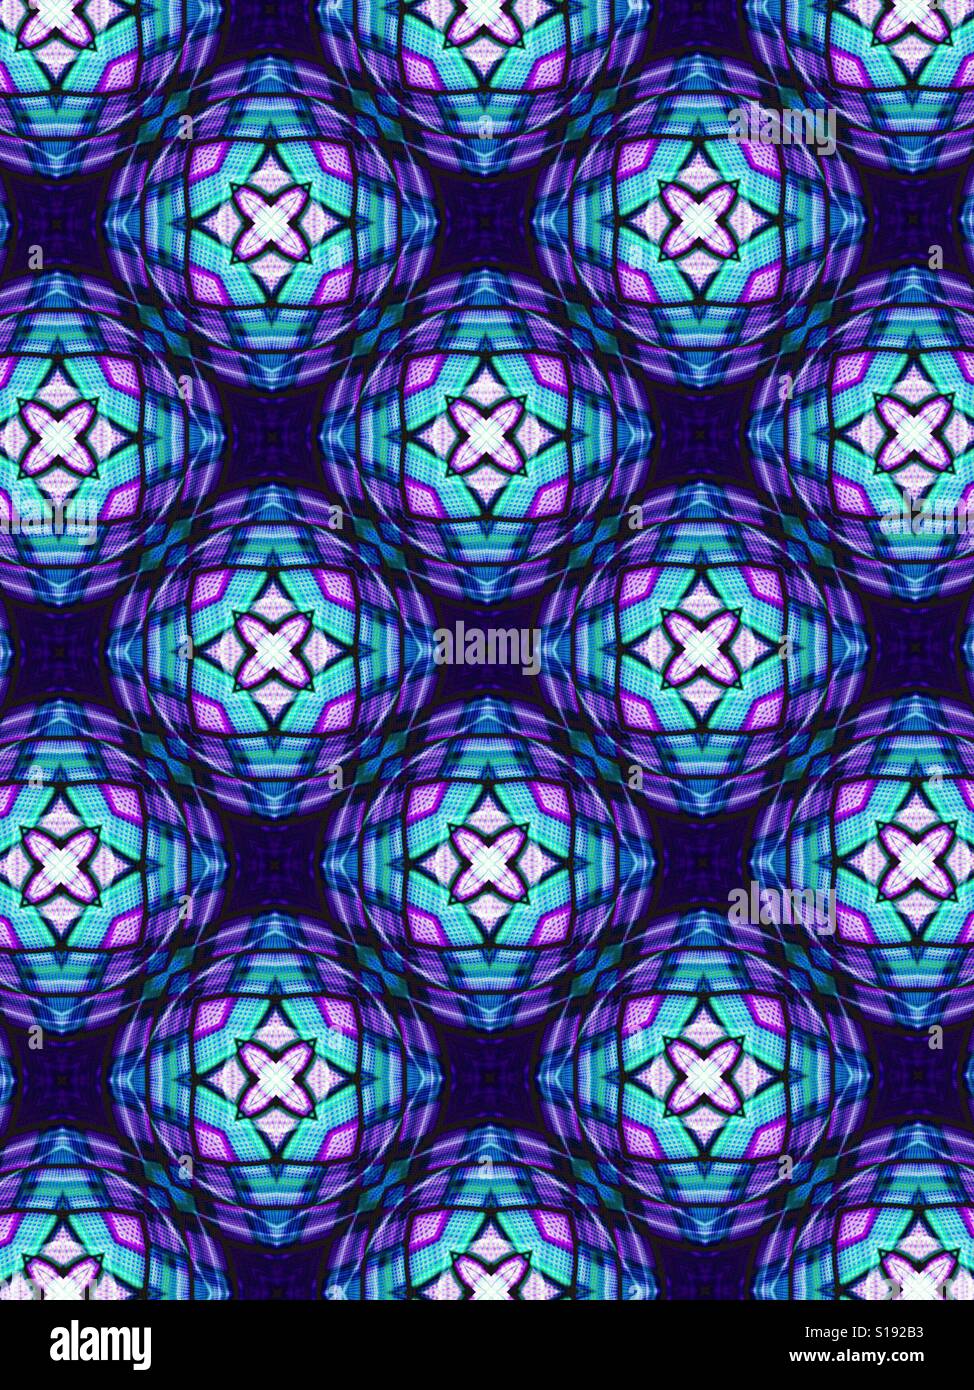 An abstract pattern of bright circles with stars in the center using the colors purple and blue Stock Photo